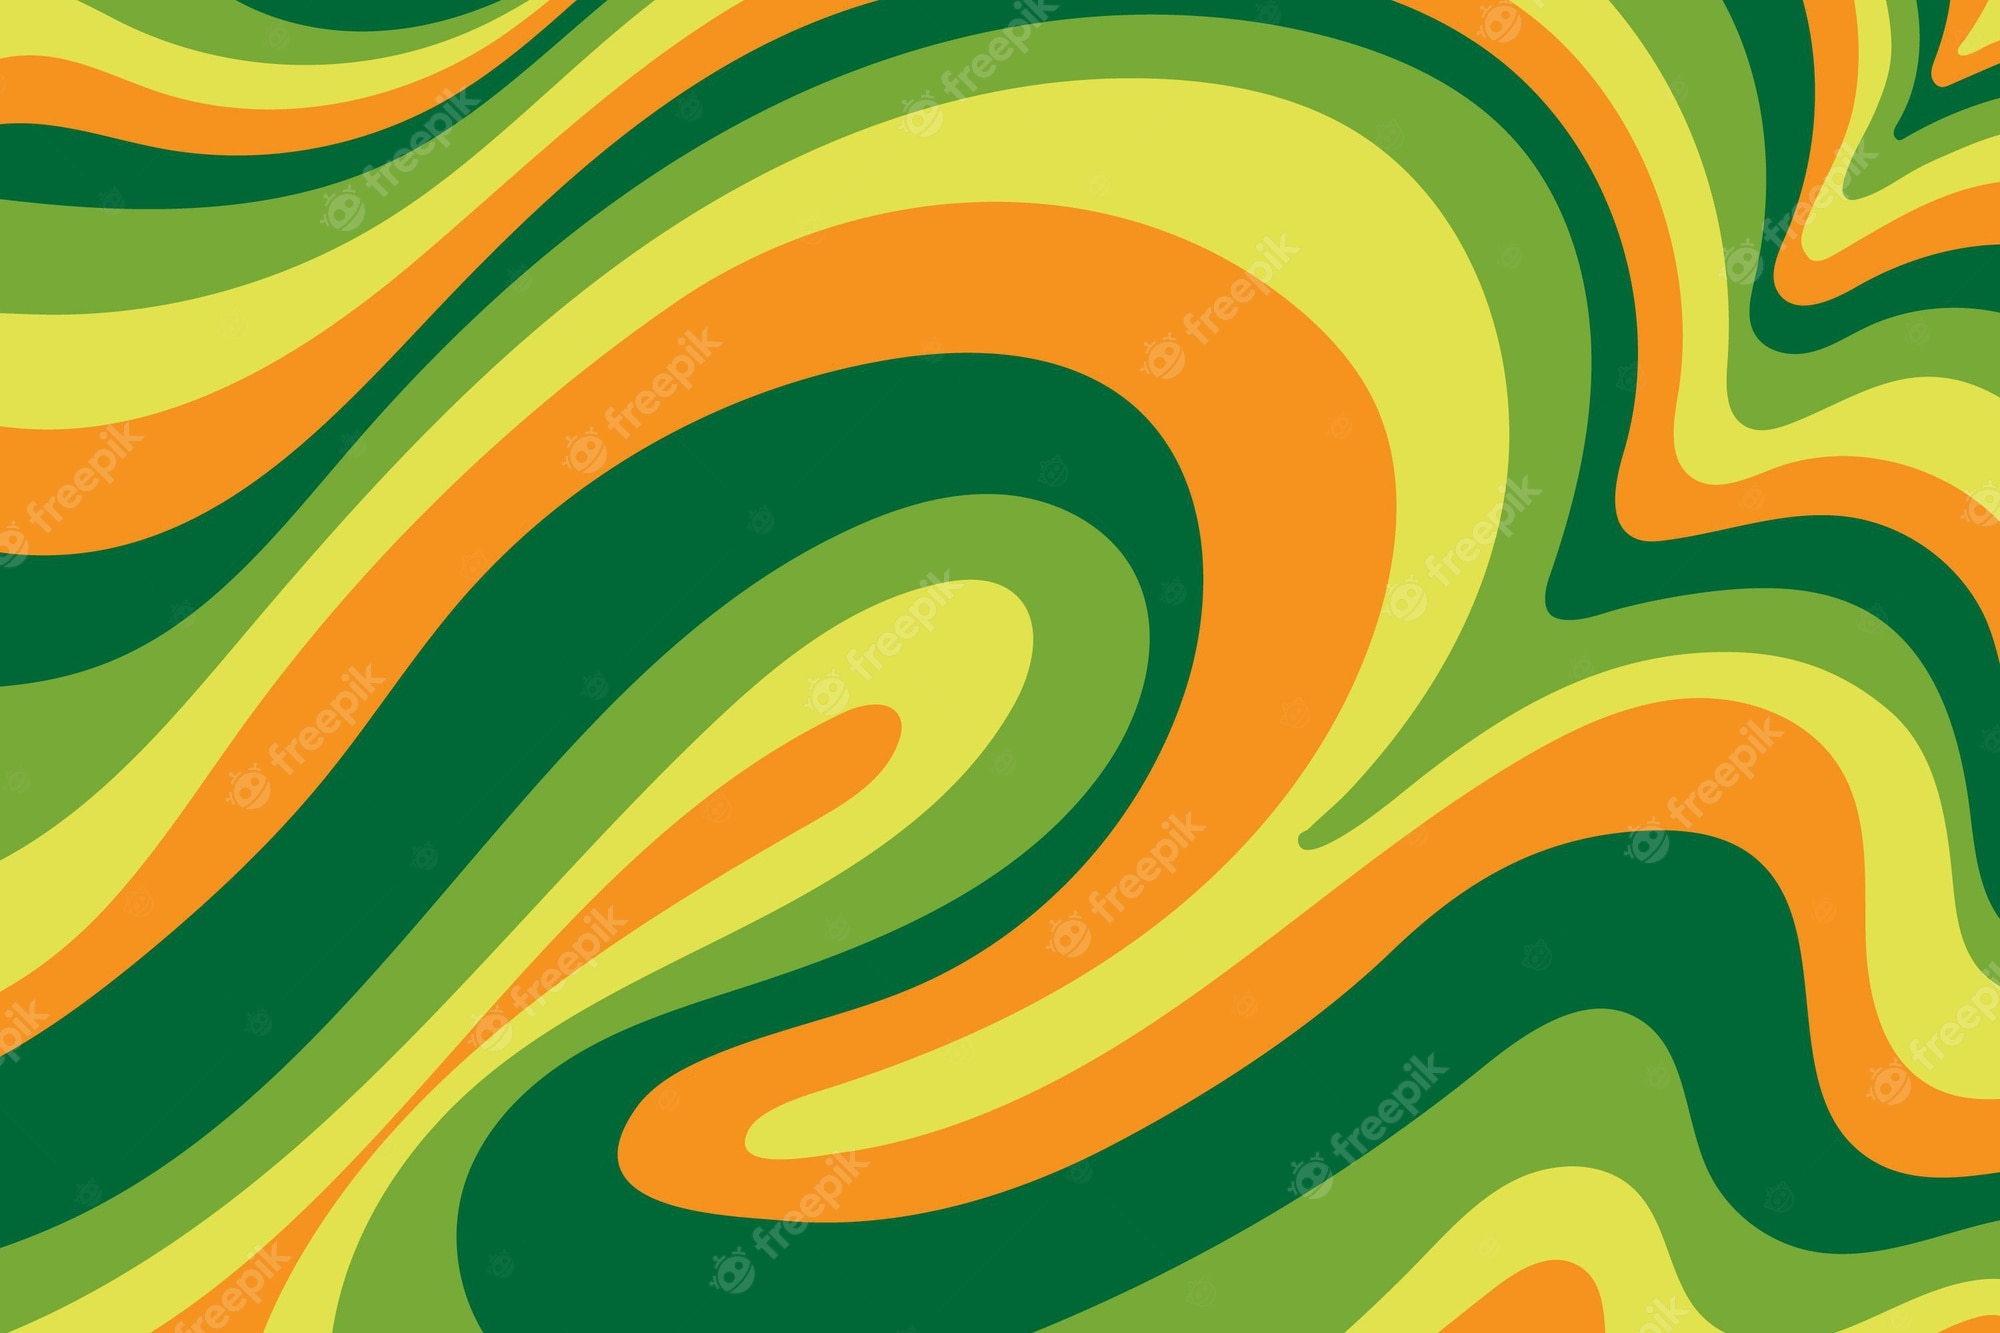 Groovy 70s Background Image